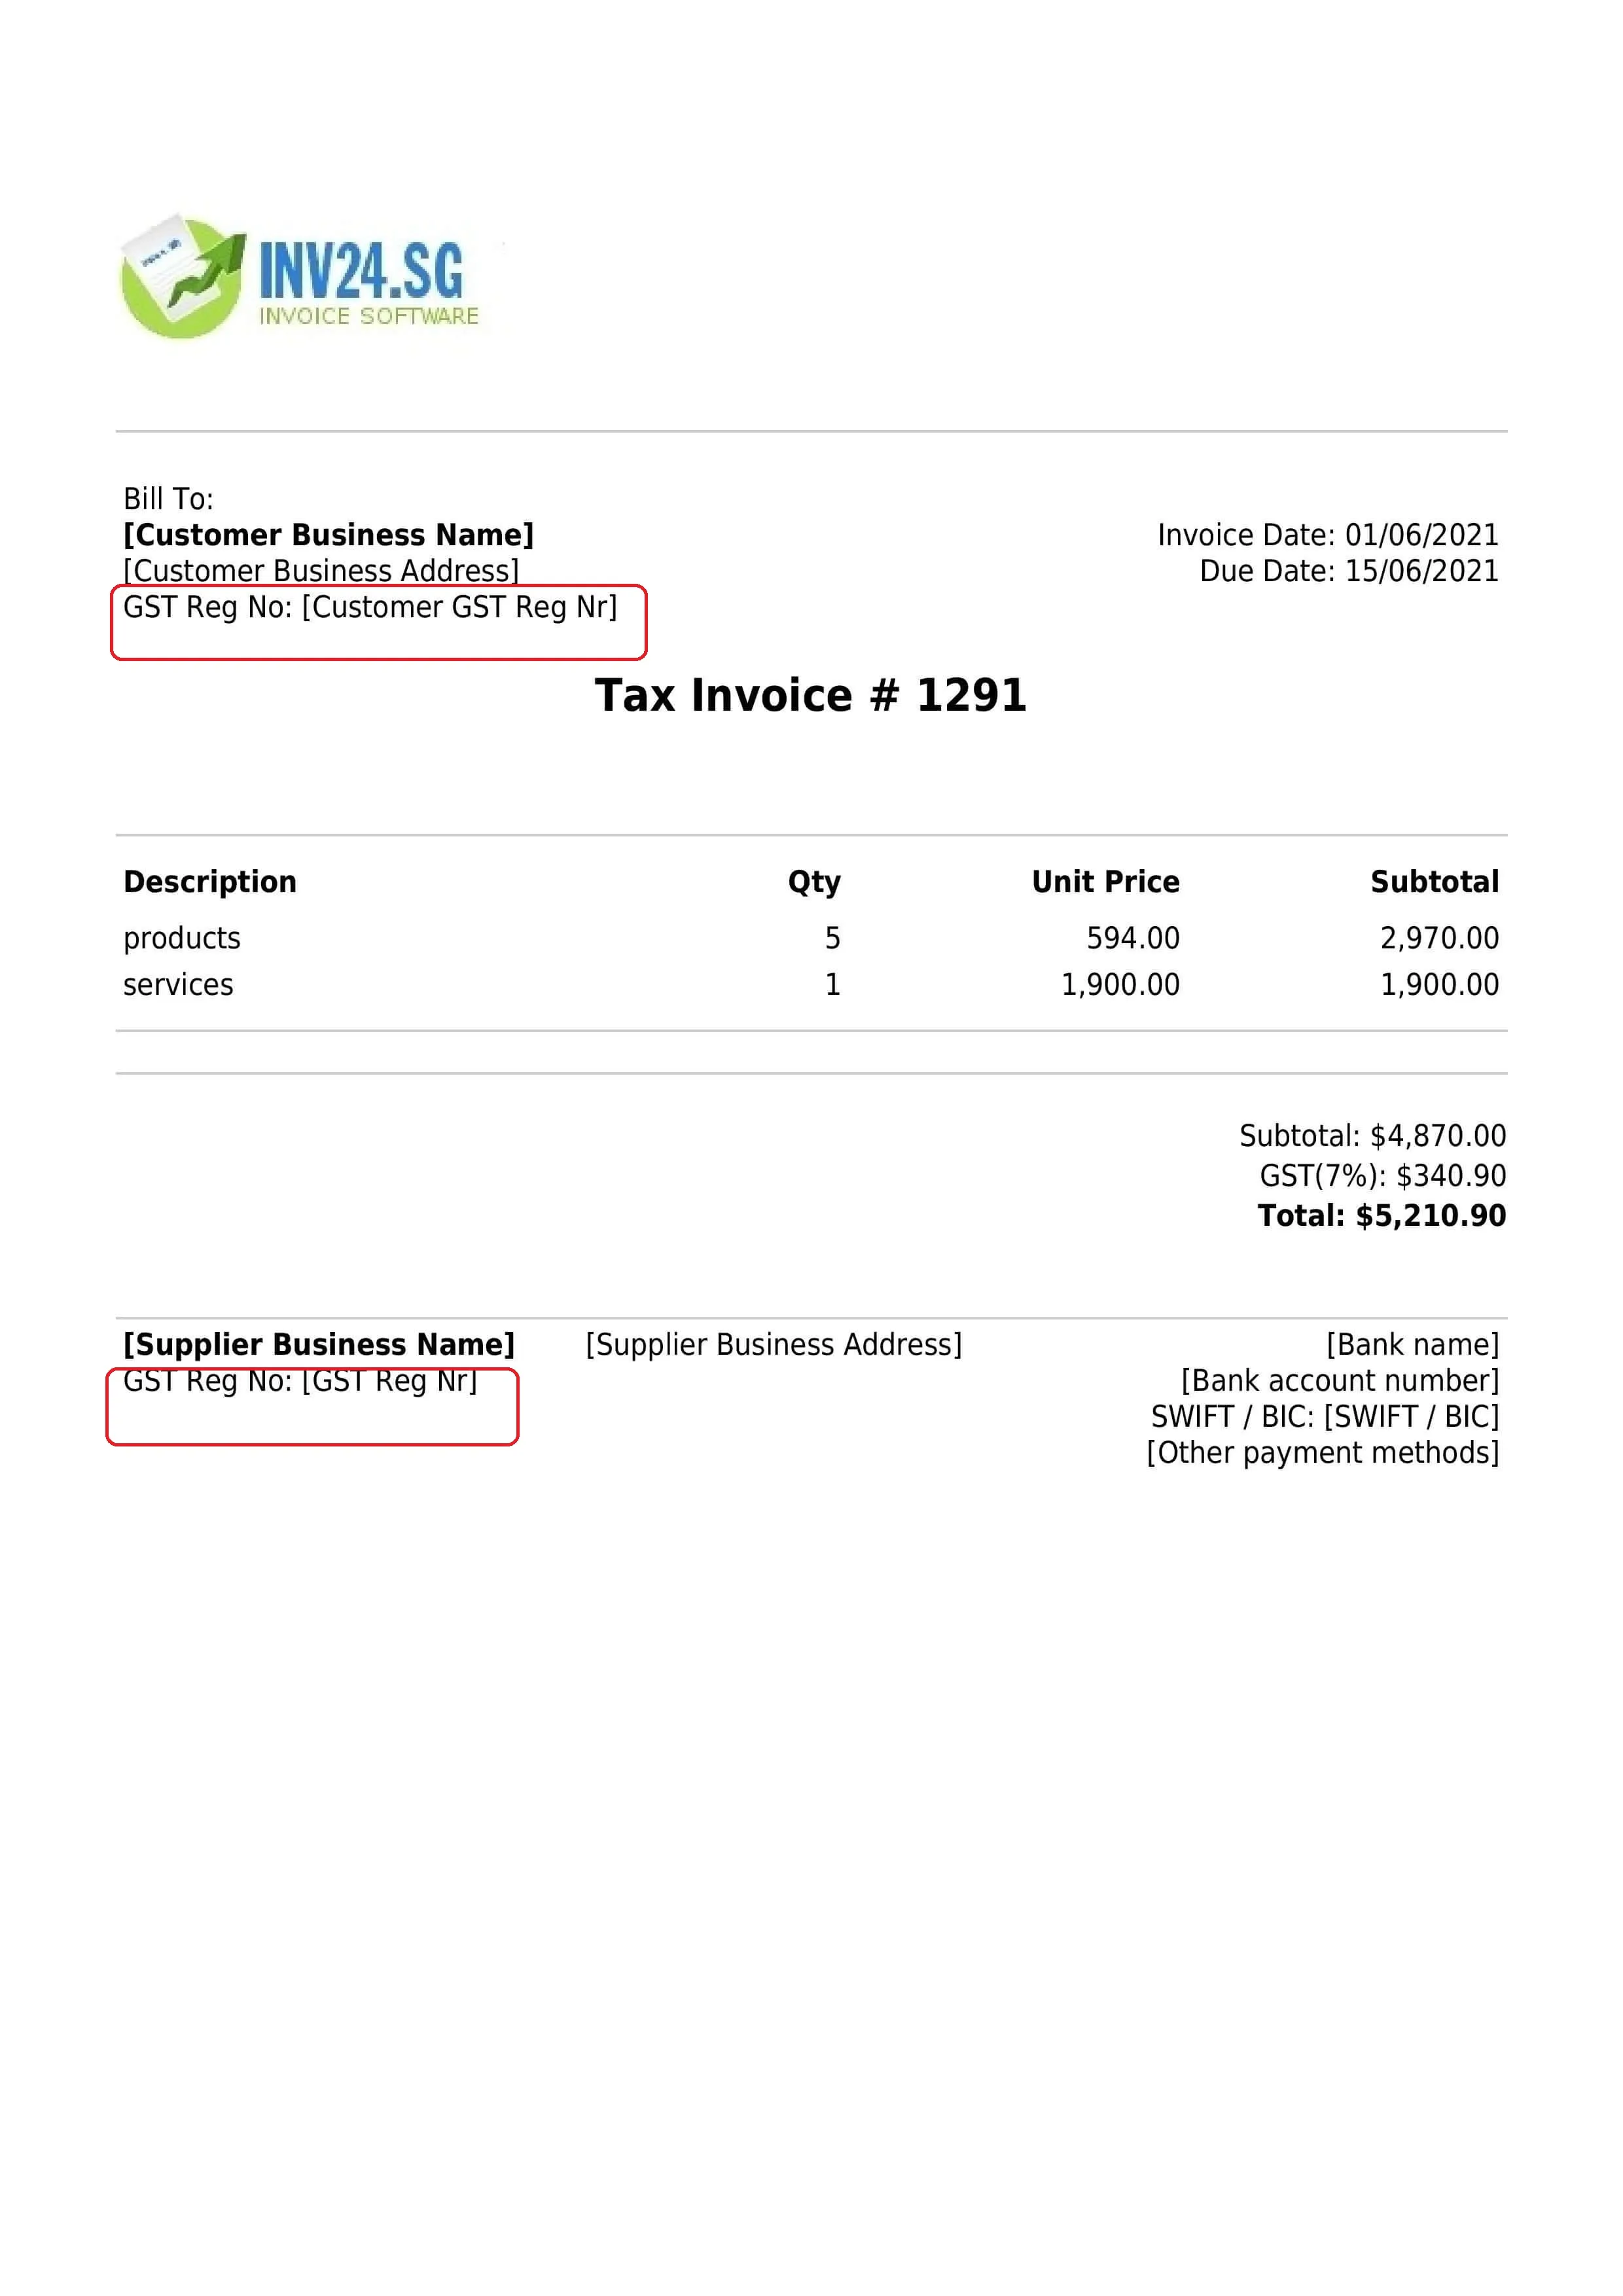 GST registration number on the invoice